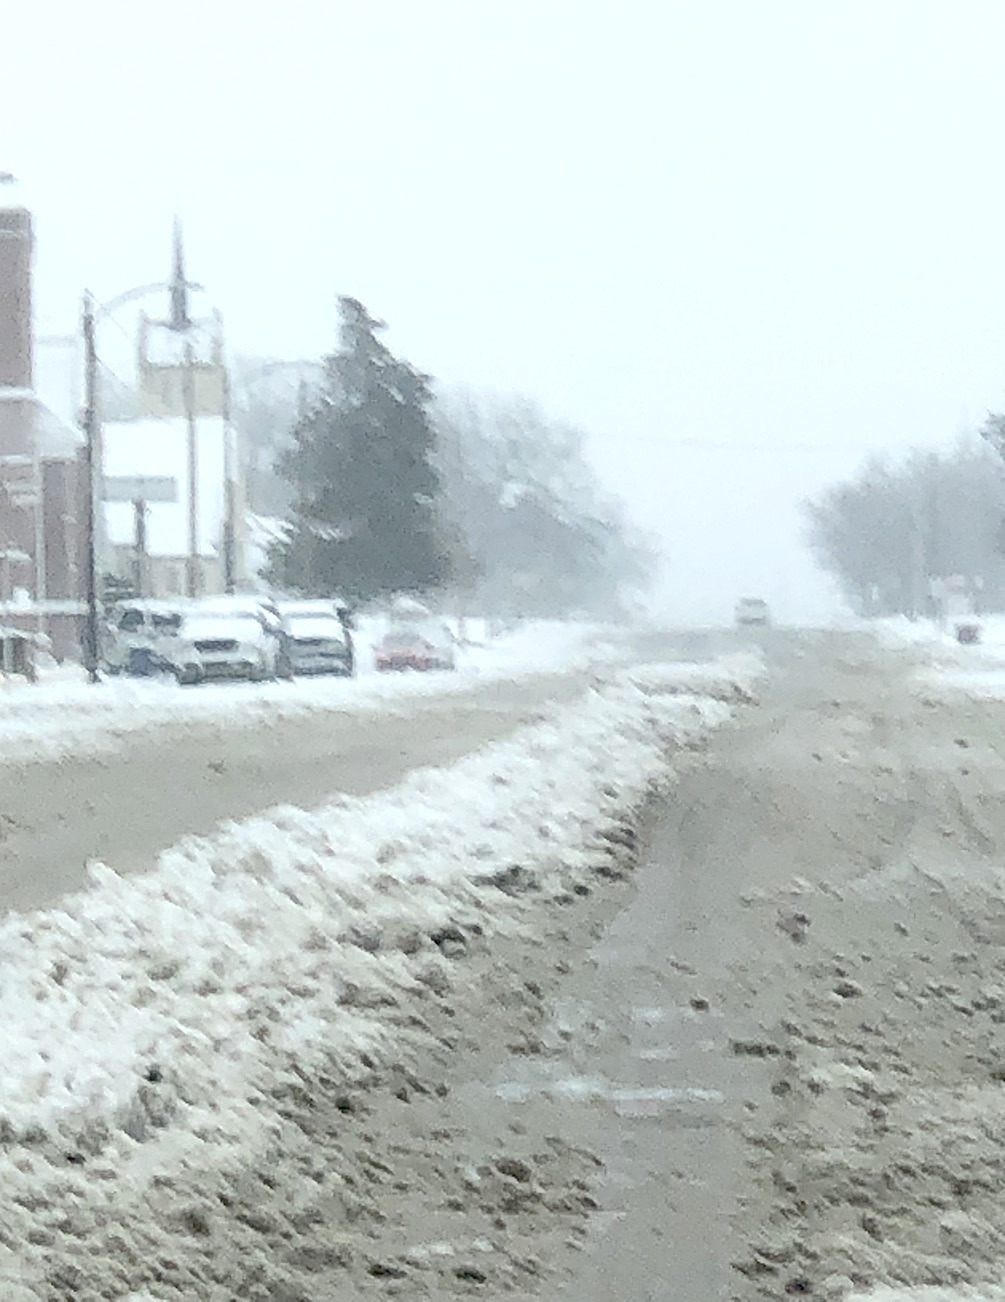 THIS PICTURE shows the first round of snow received on Monday, Jan. 8, looking east on Main Street.